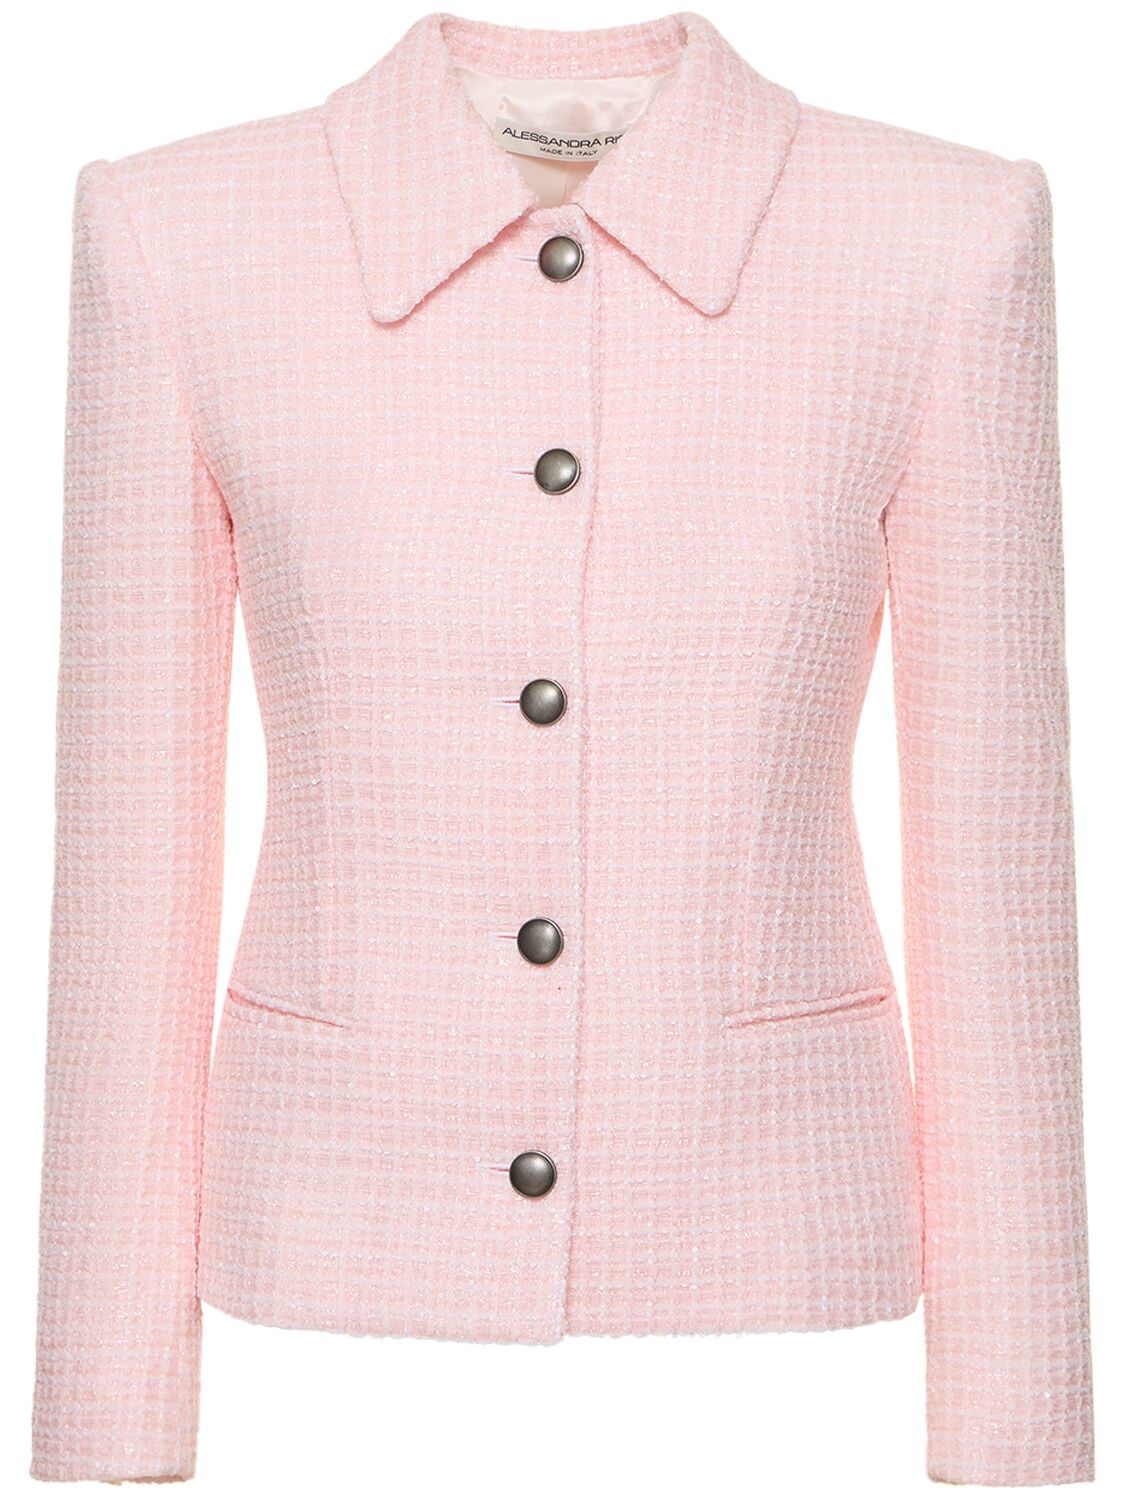 Alessandra Rich Sequined Tweed Single Breasted Jacket In Light Pink